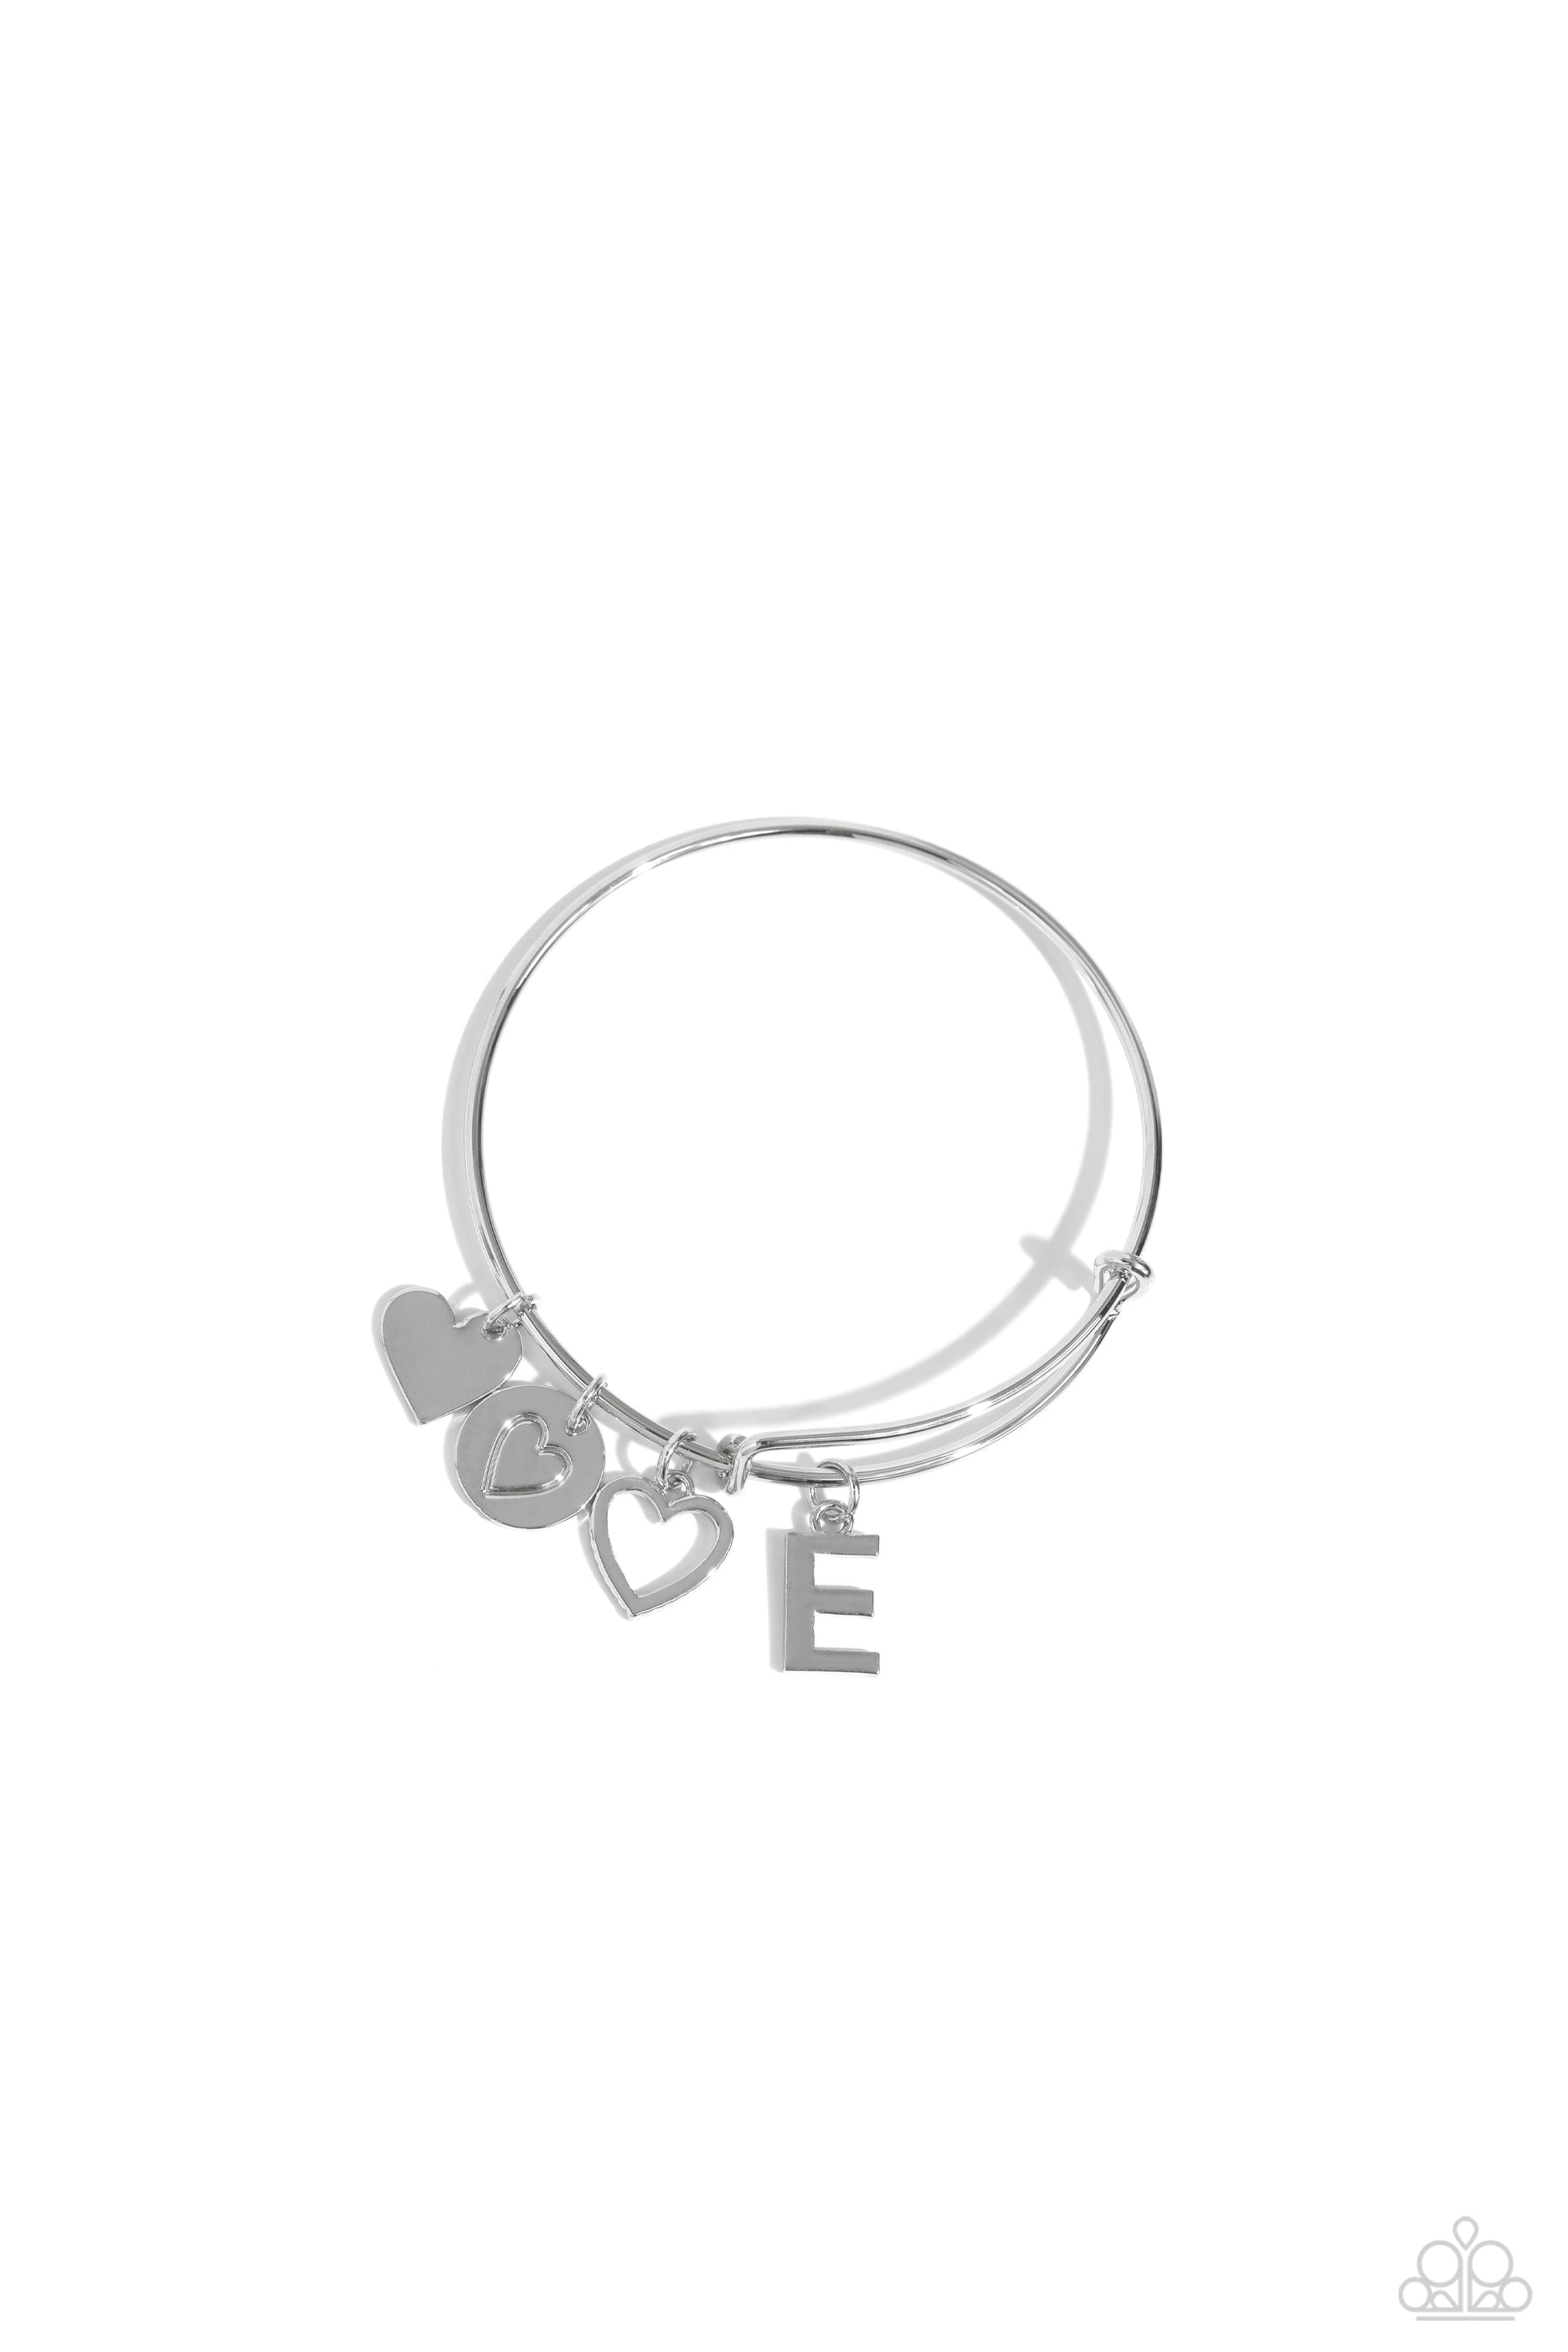 Making It INITIAL Silver "E" Bracelet - Paparazzi Accessories  Featuring shiny silver, airy, and stamped finishes, a mismatched collection of dainty heart charms, and the letter "E" glides along a silver bar fitting at the center of the wrist for a romantic, sentimental flair.  Sold as one individual bracelet.  SKU: P9BA-SVXX-189XX